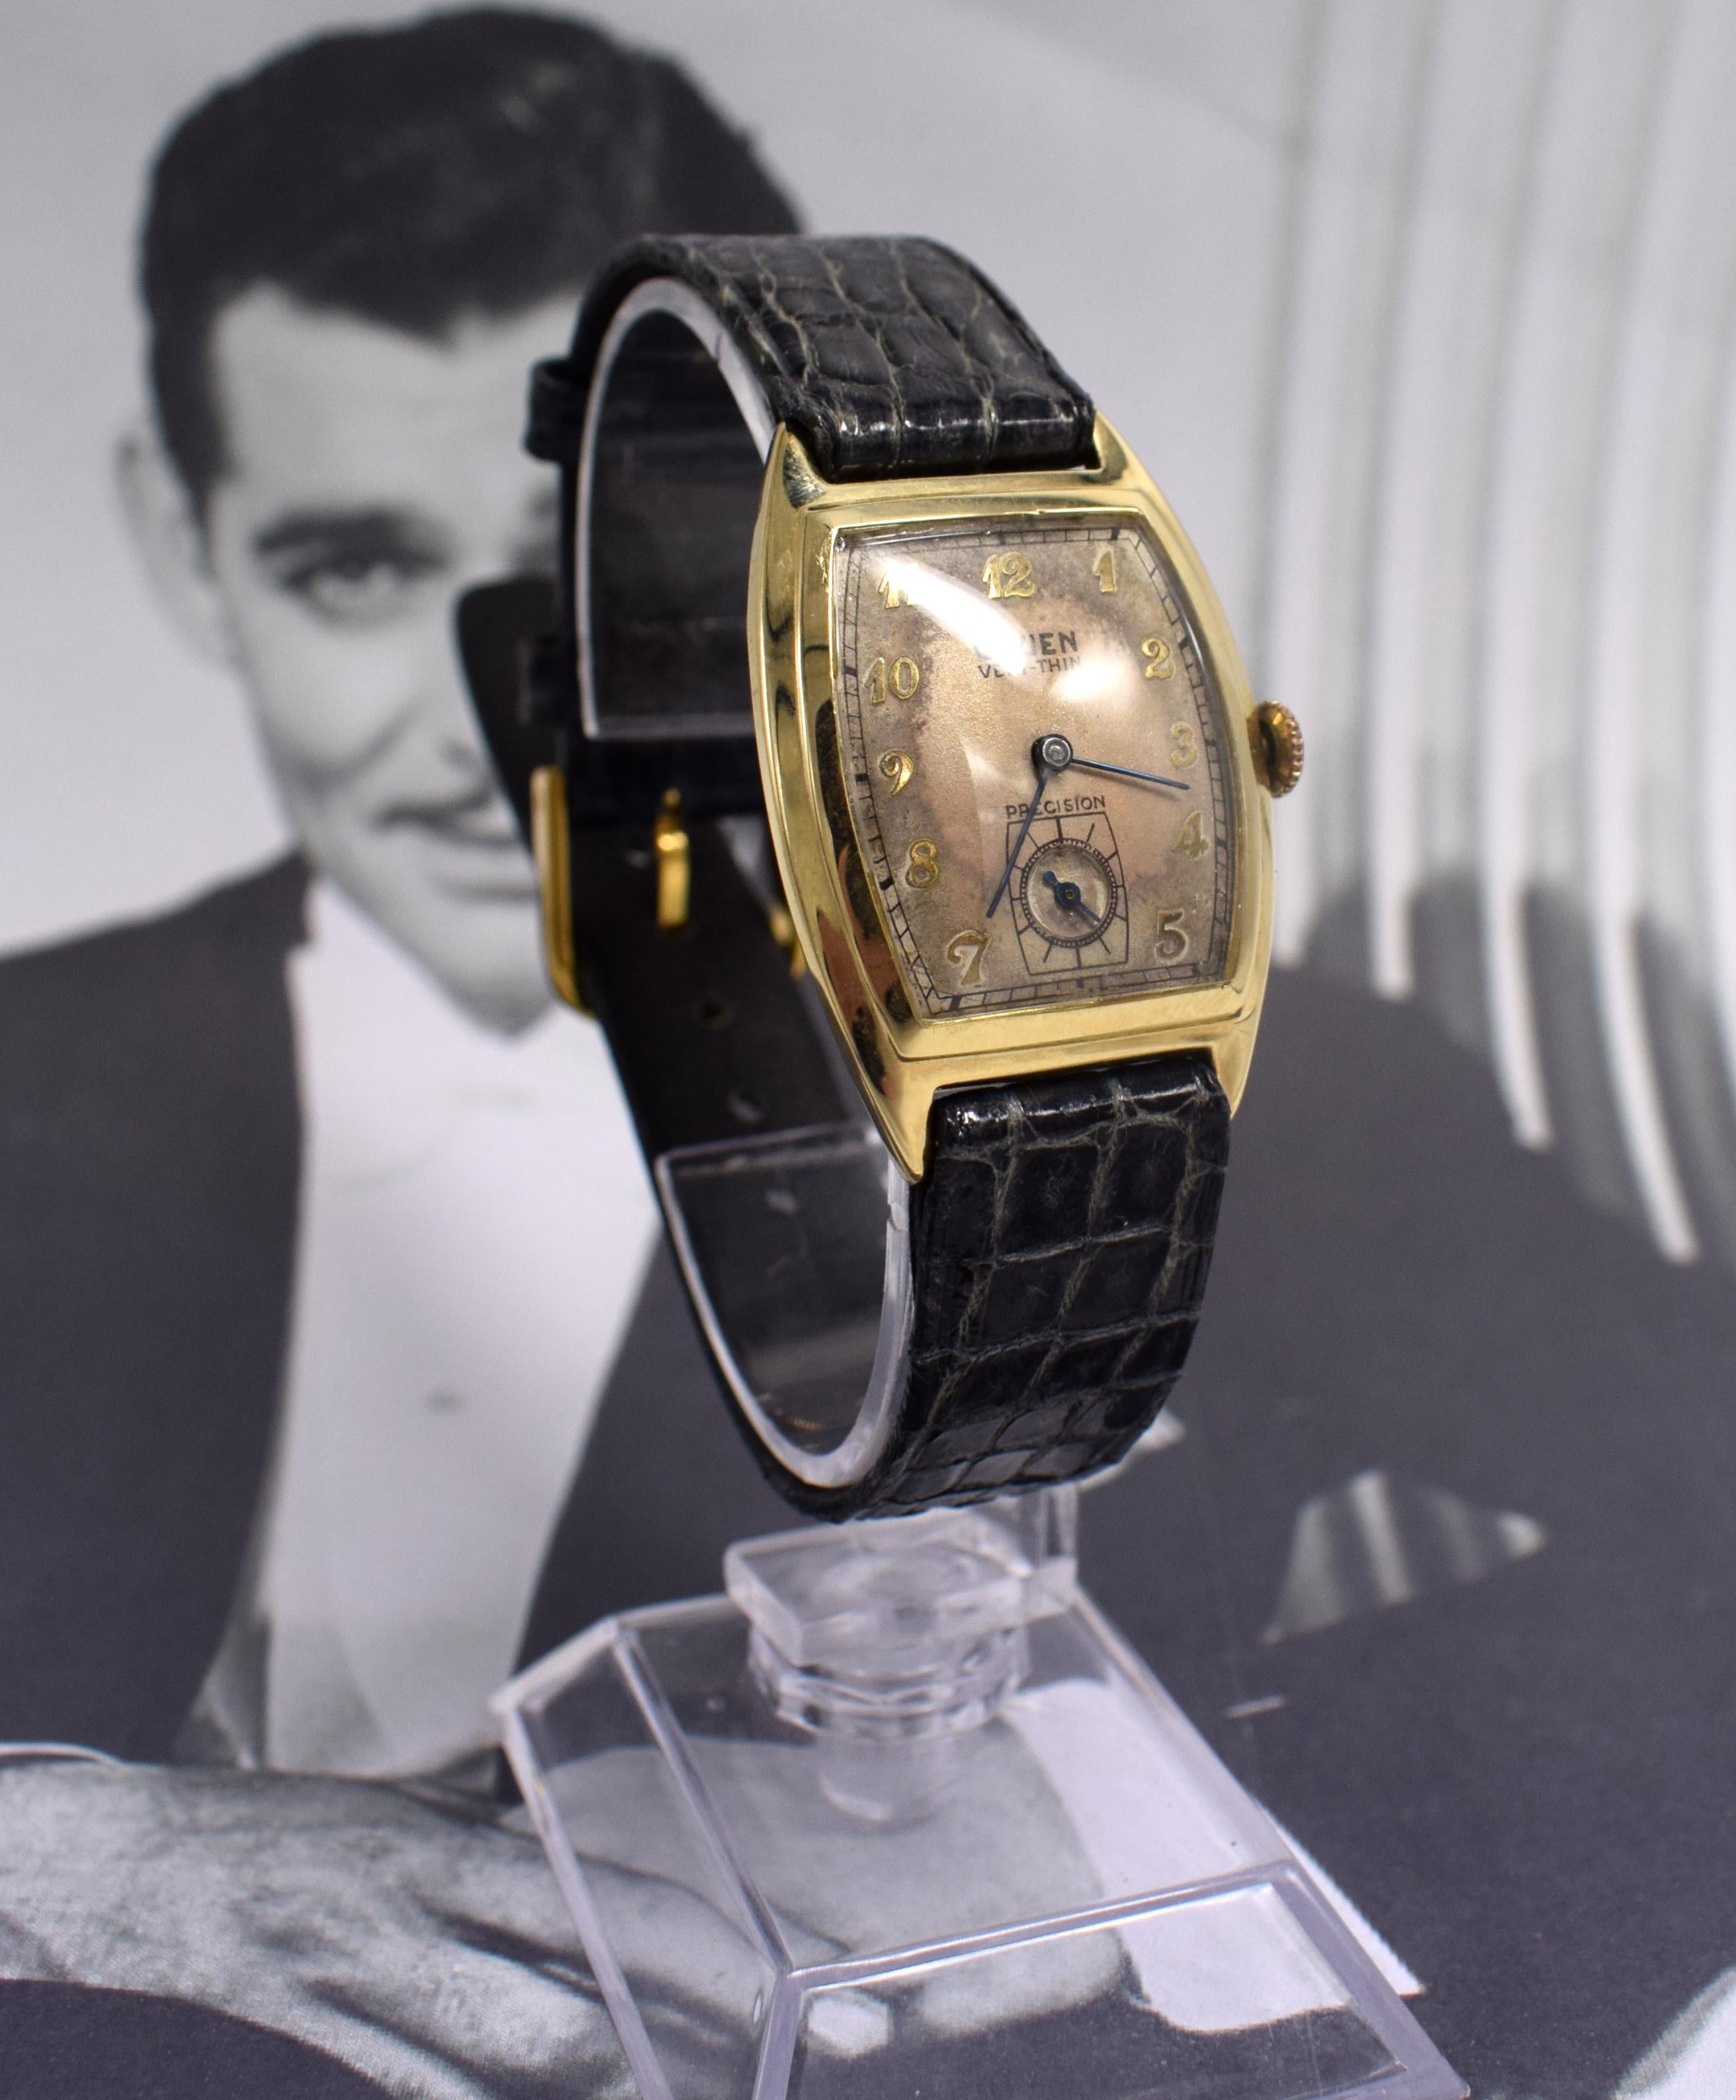 Fabulous opportunity to acquire this wonderful gents manual wrist watch dating to 1930's. A 14k gold plated casing both back and front that can't be mistaken for any other era which is in super condition, bright and crisp.  The original dial has a